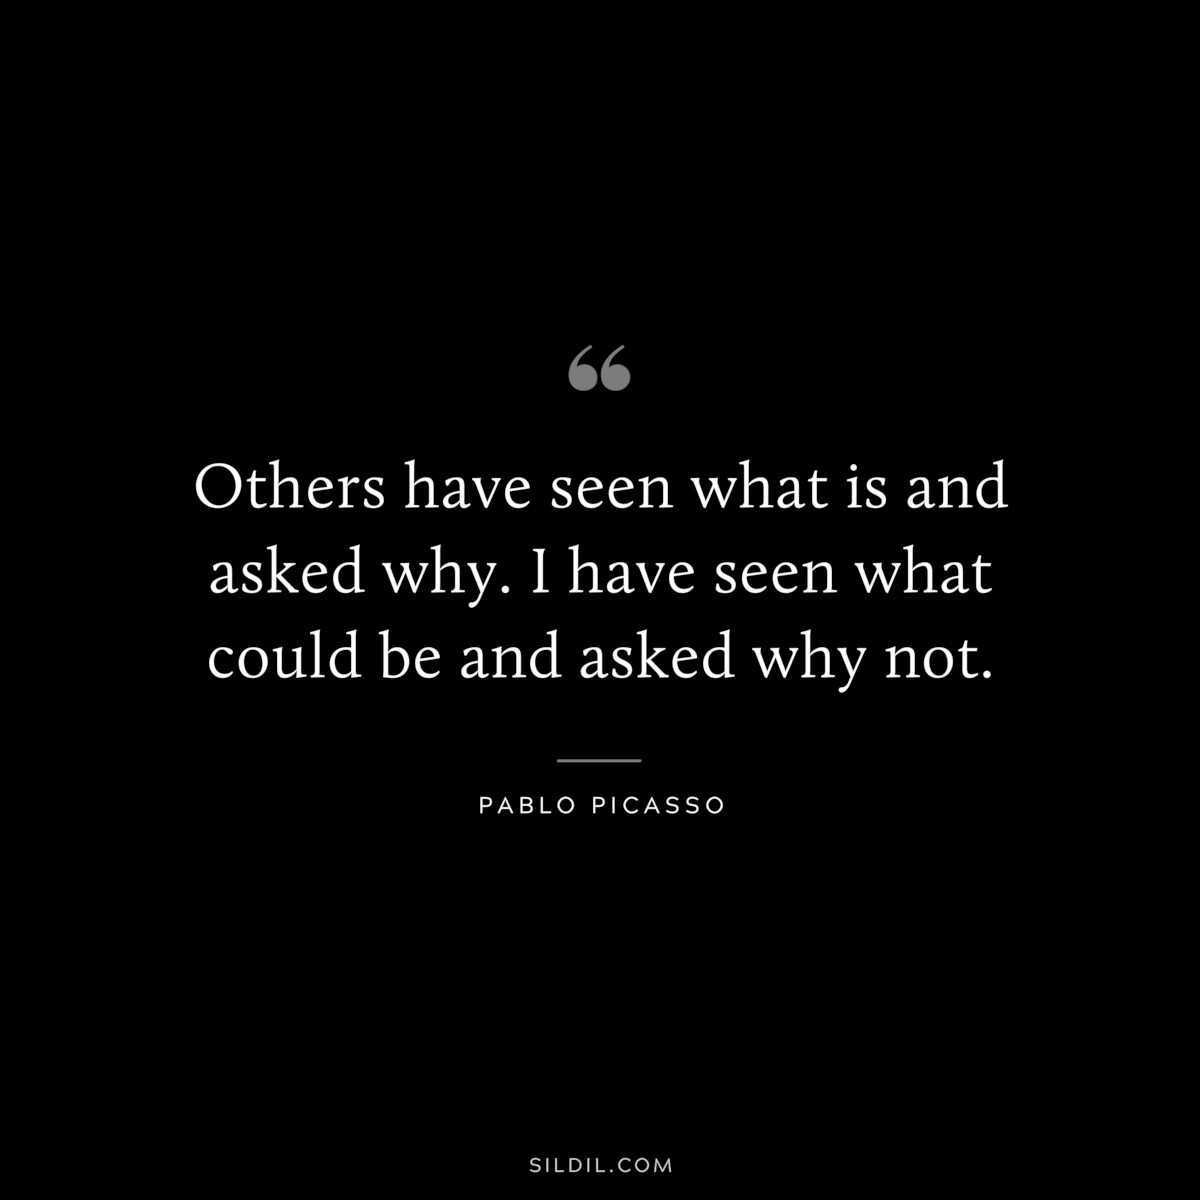 Others have seen what is and asked why. I have seen what could be and asked why not. ― Pablo Picasso